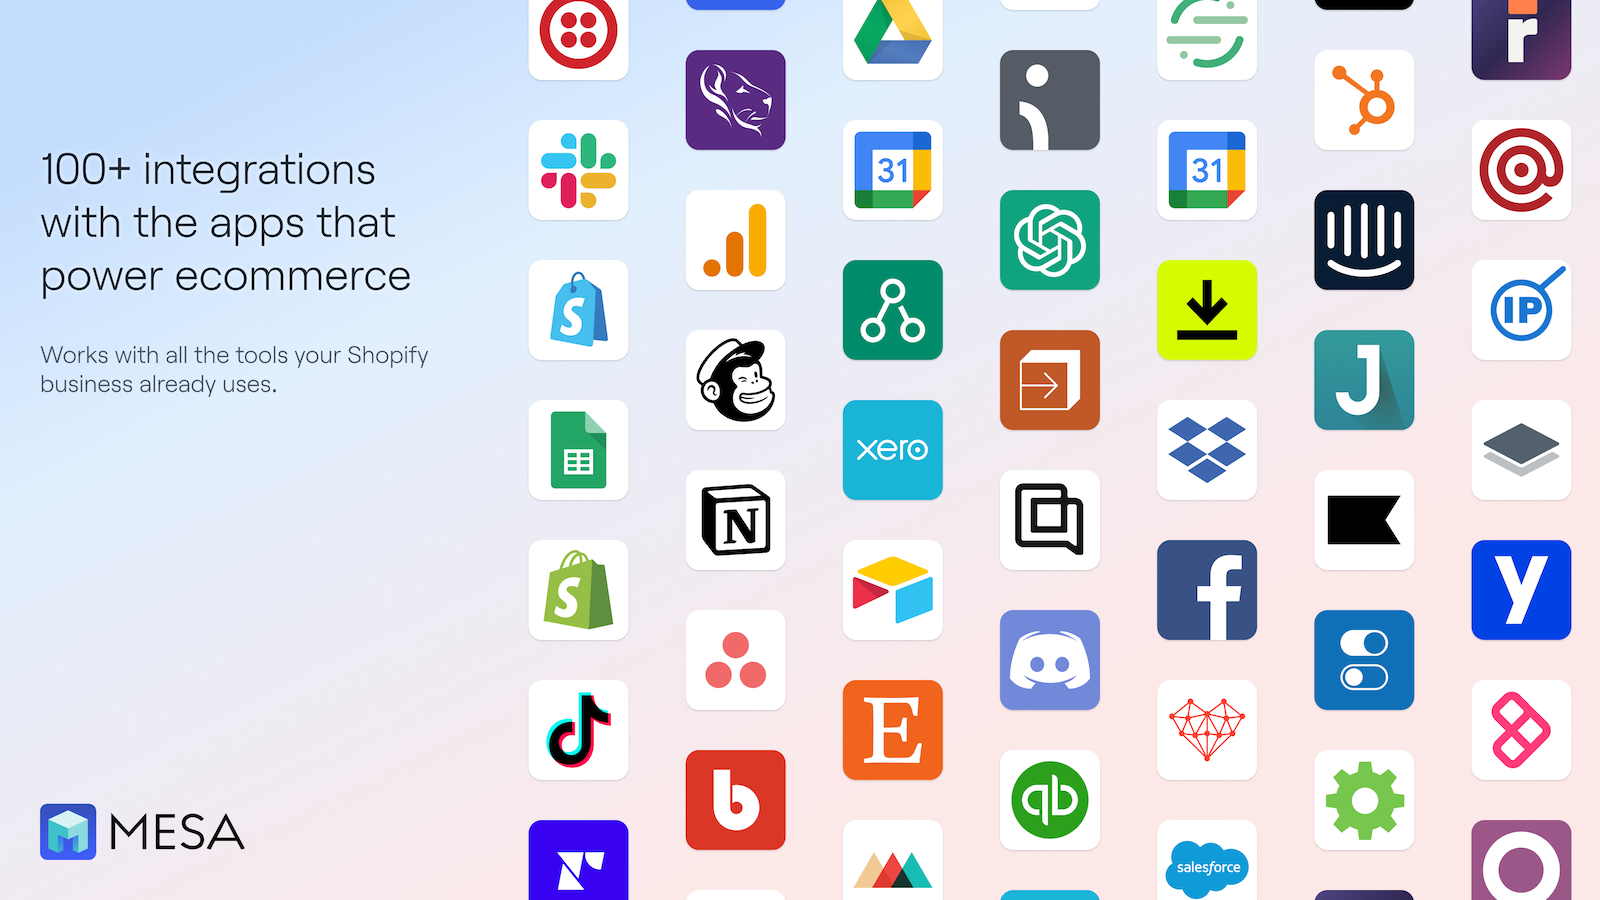 100+ integrations with the apps that power ecommerce